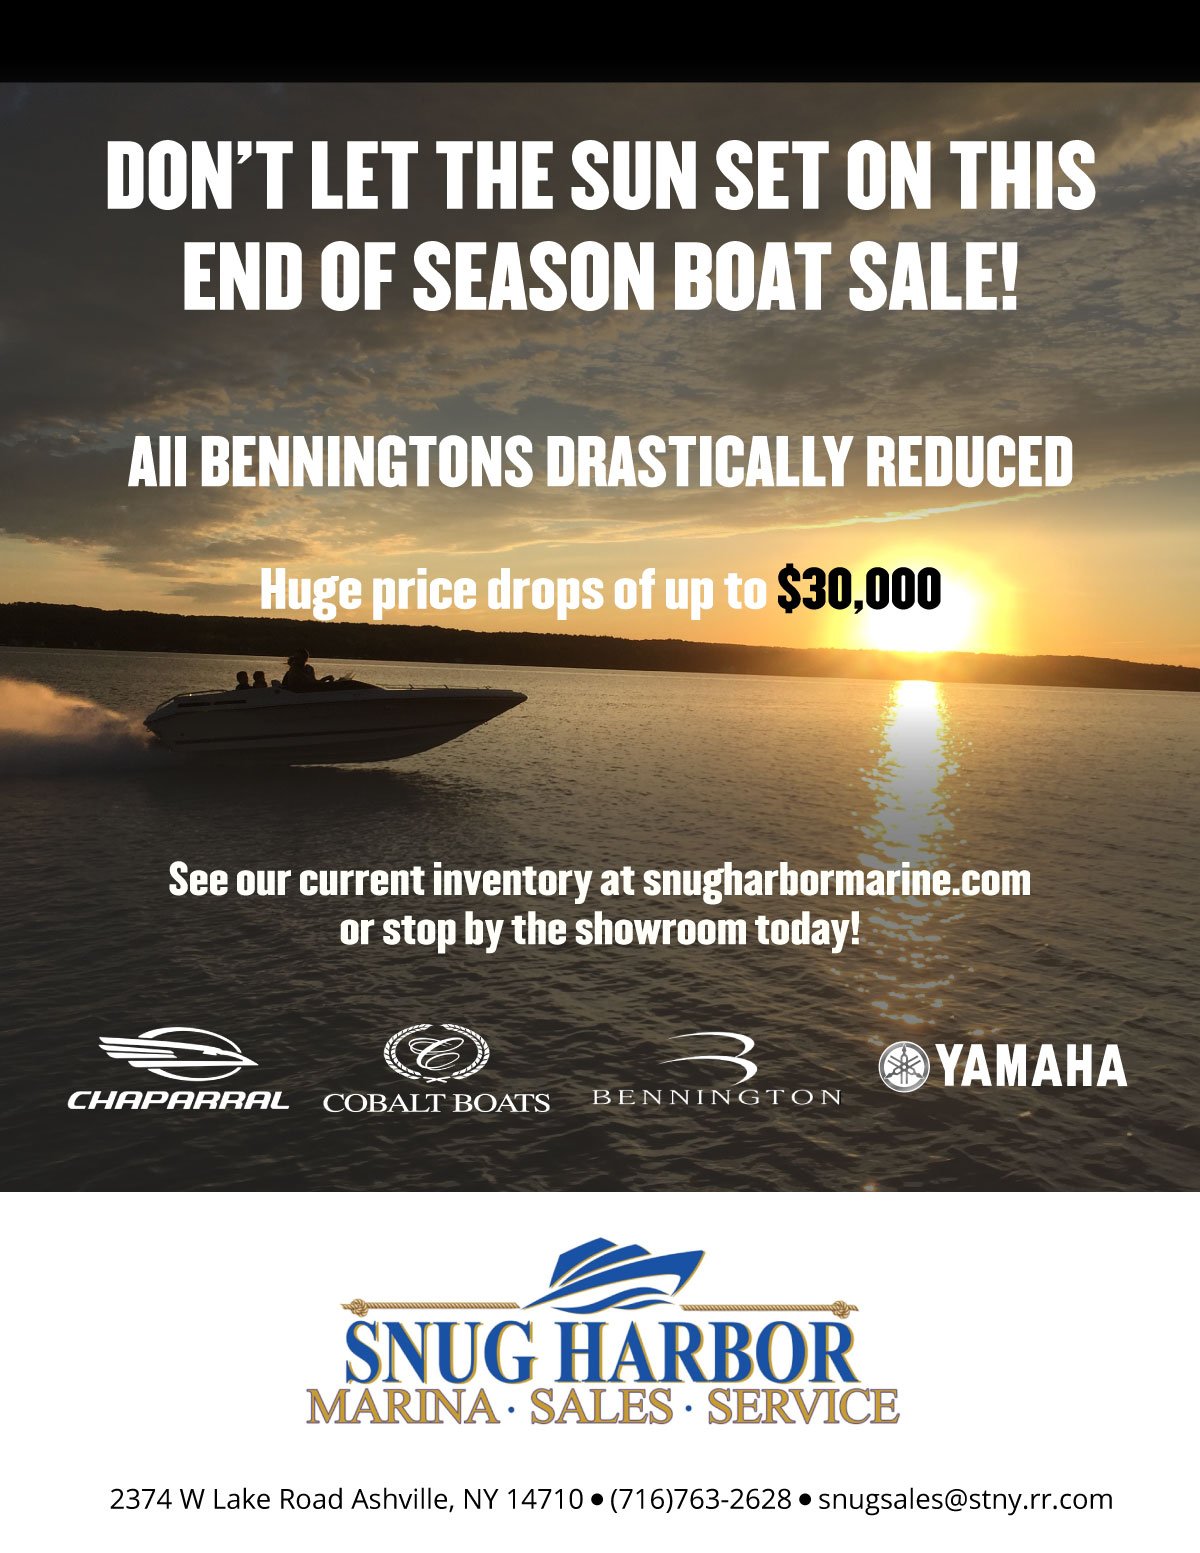 End of Summer Sales Event, all boats heavily discounted!!! Savings up to $  30,000